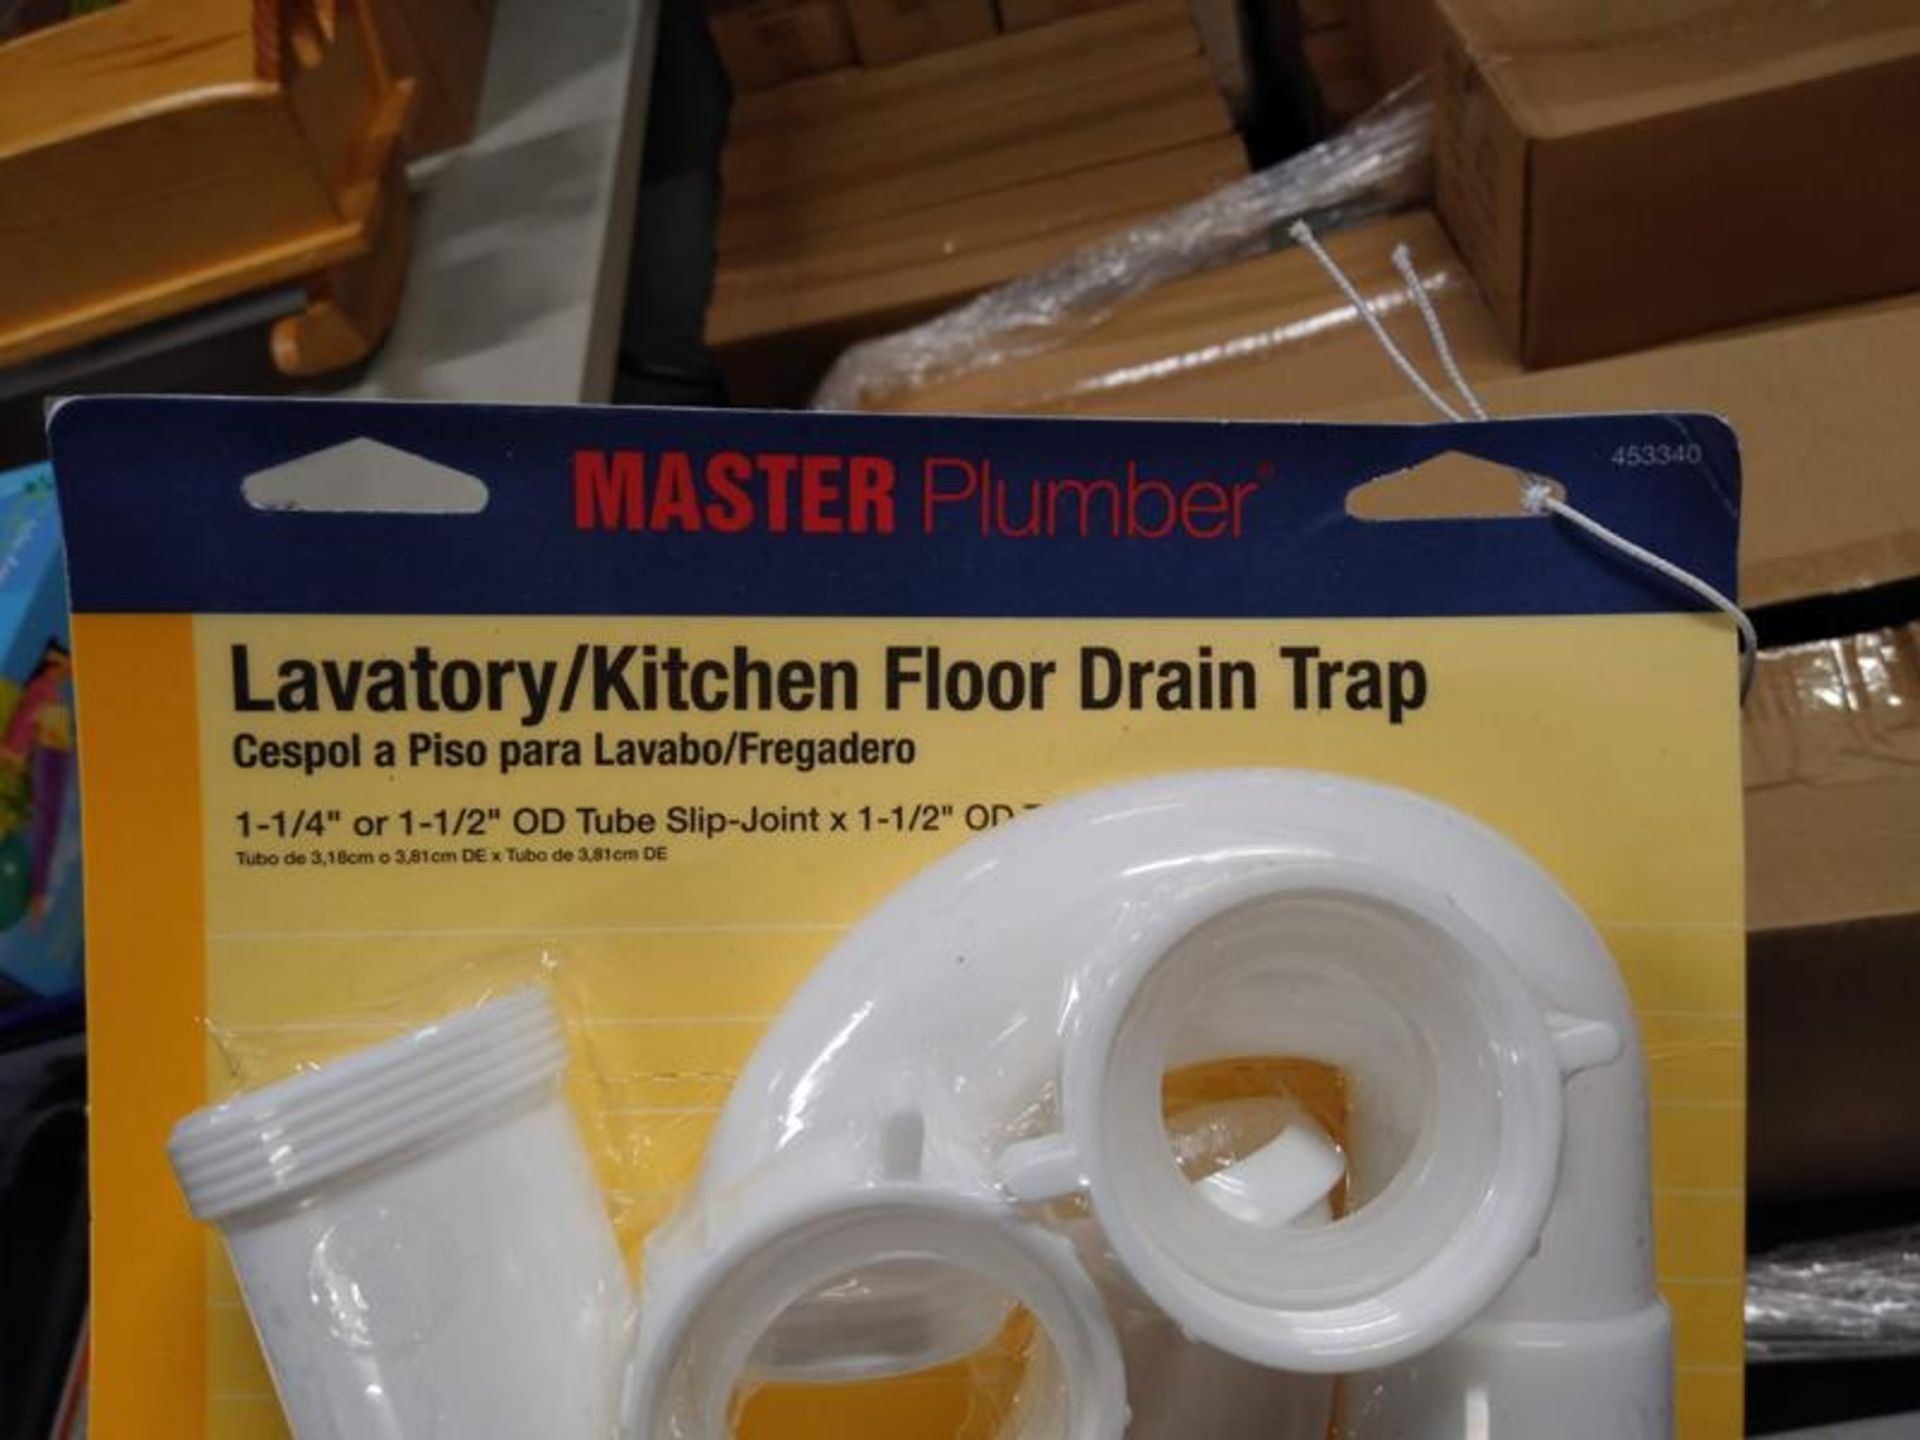 LOT OF 100 MASTER PLUMBER LAVATORY / KITCHEN FLOOR DRAIN TRAP - Image 3 of 8